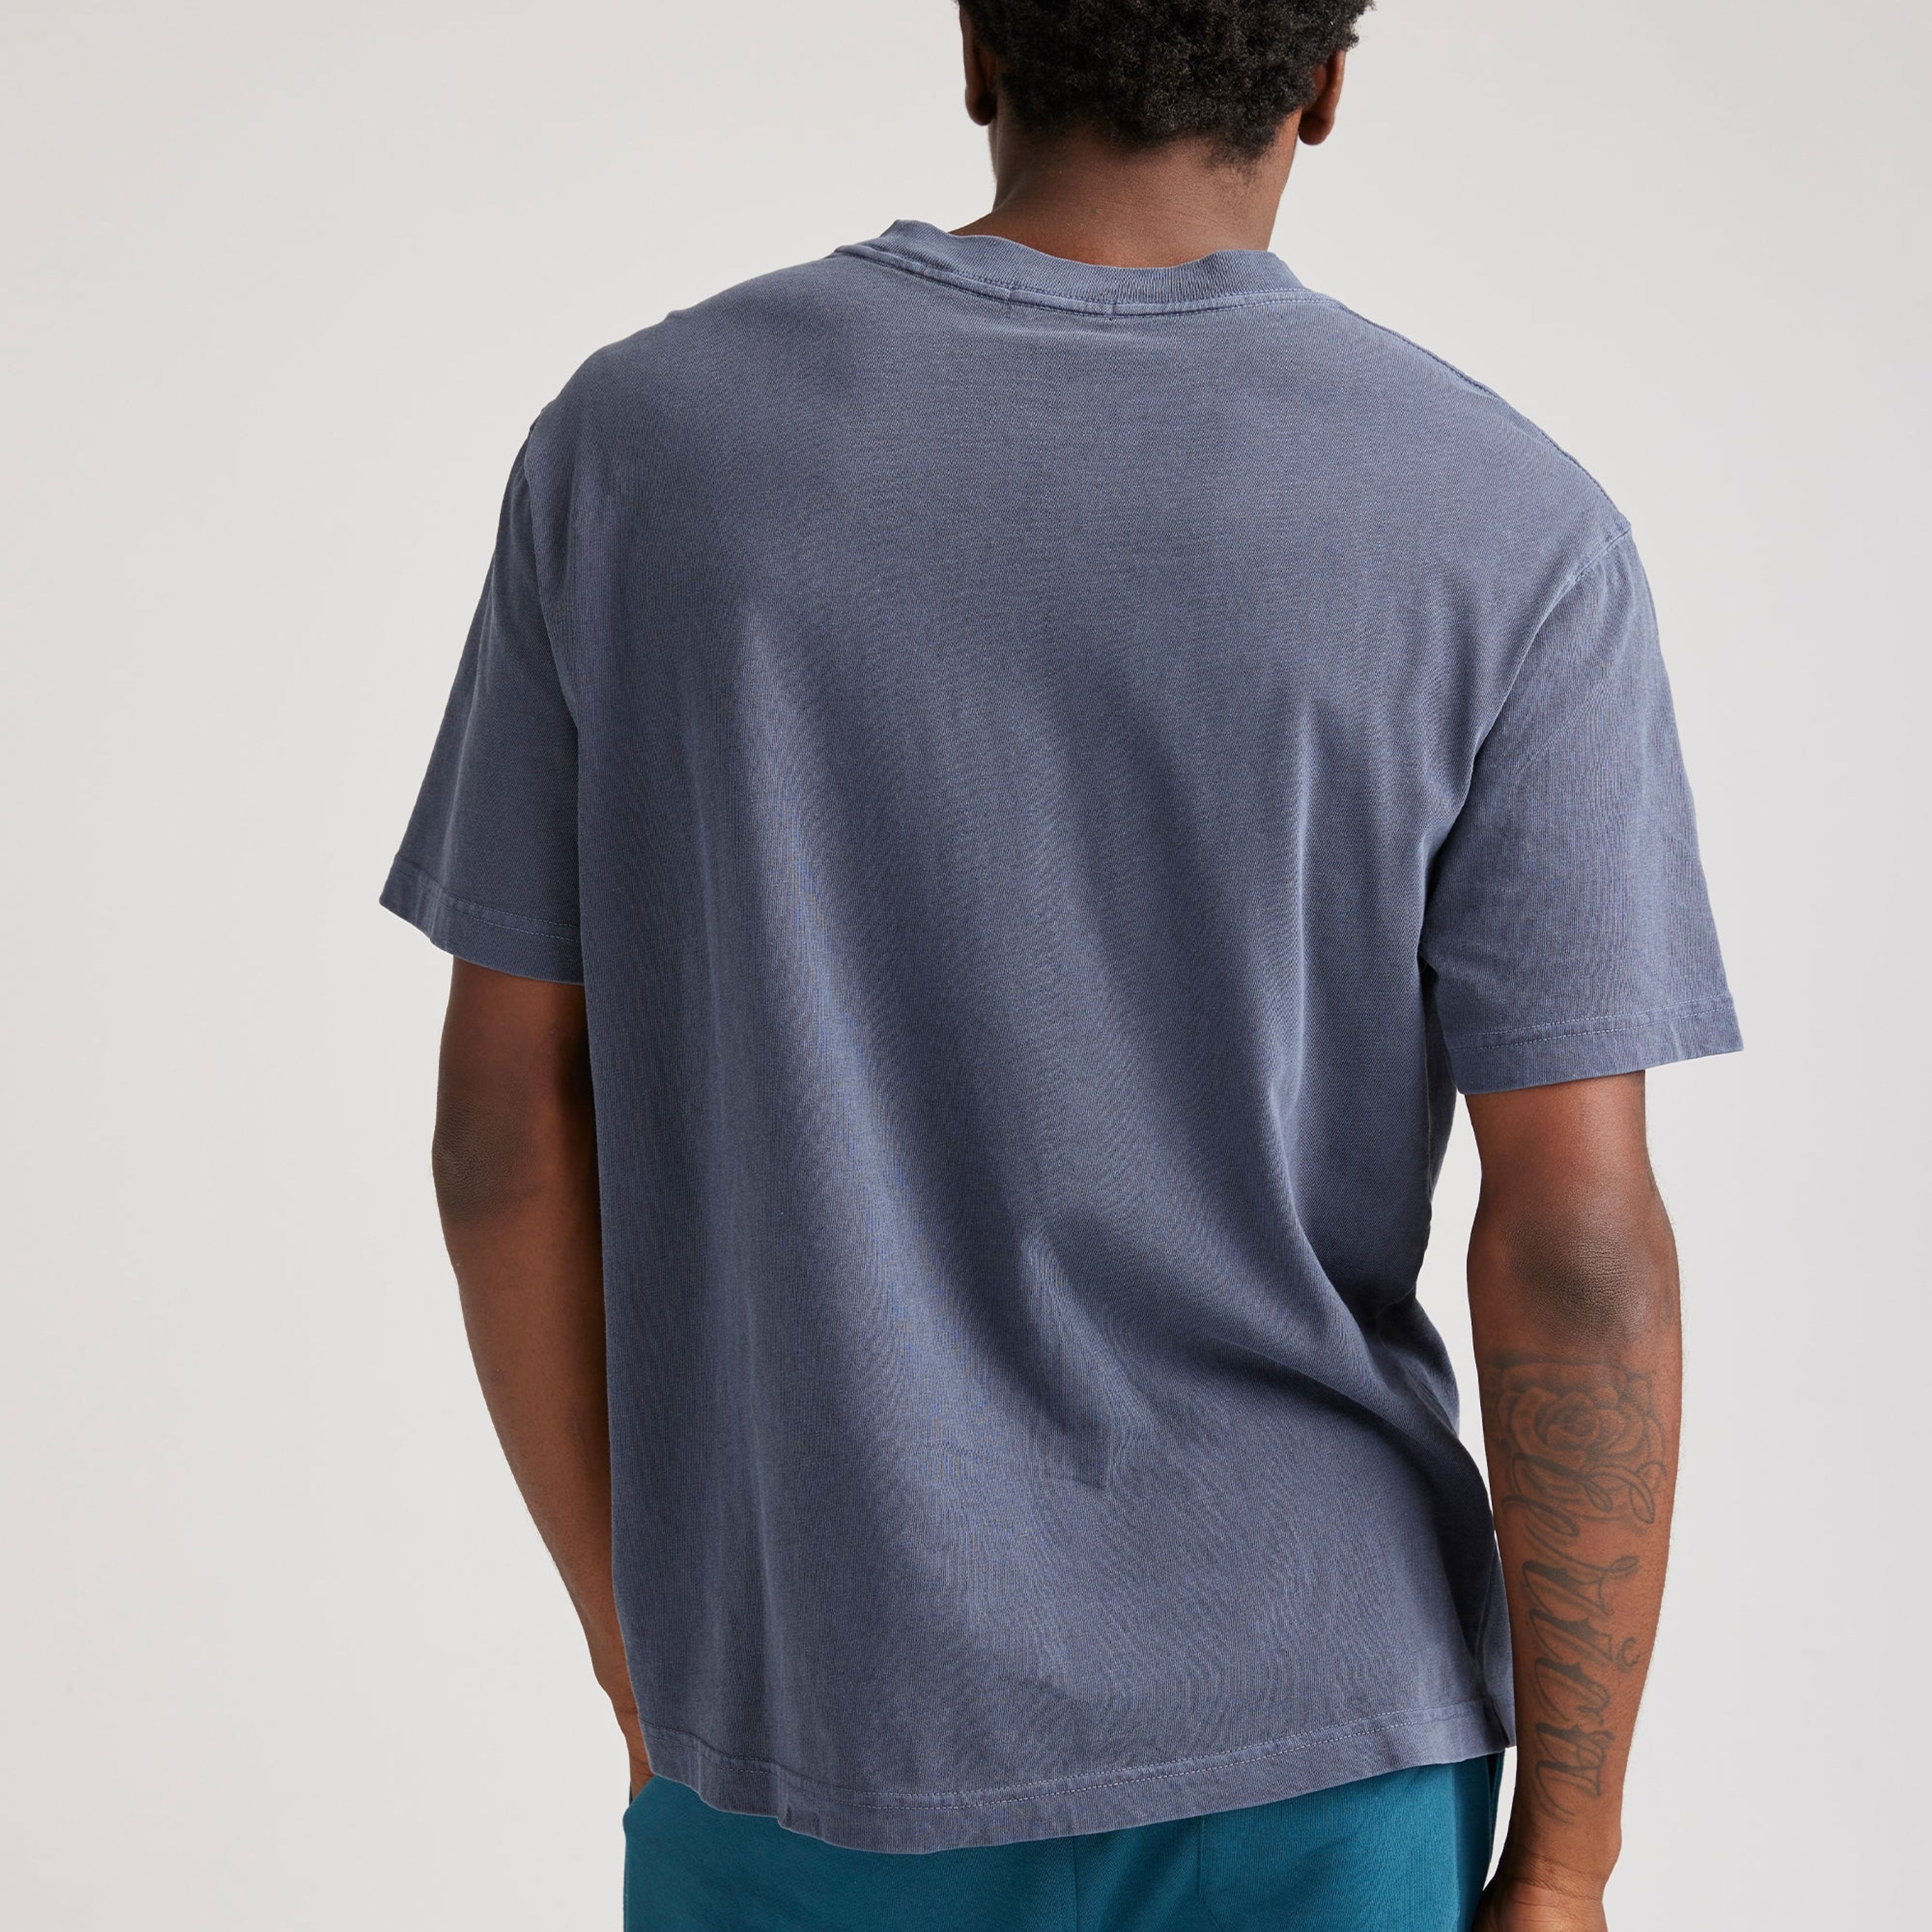 Men's Relaxed Tee